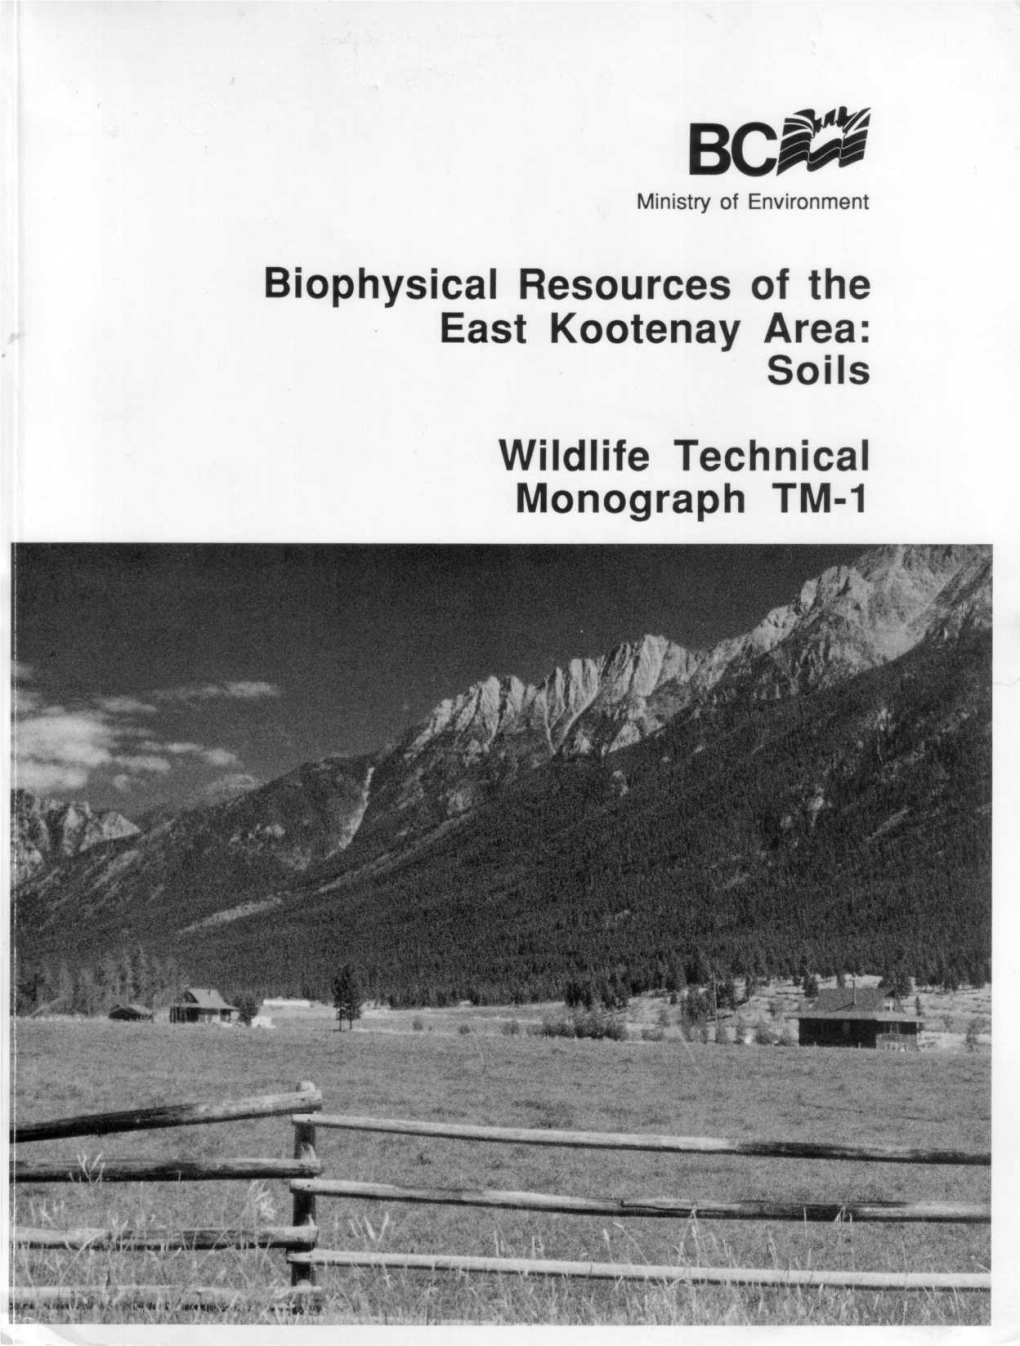 Biophysical Resources of the East Kootenay Area: Soils Wildlife